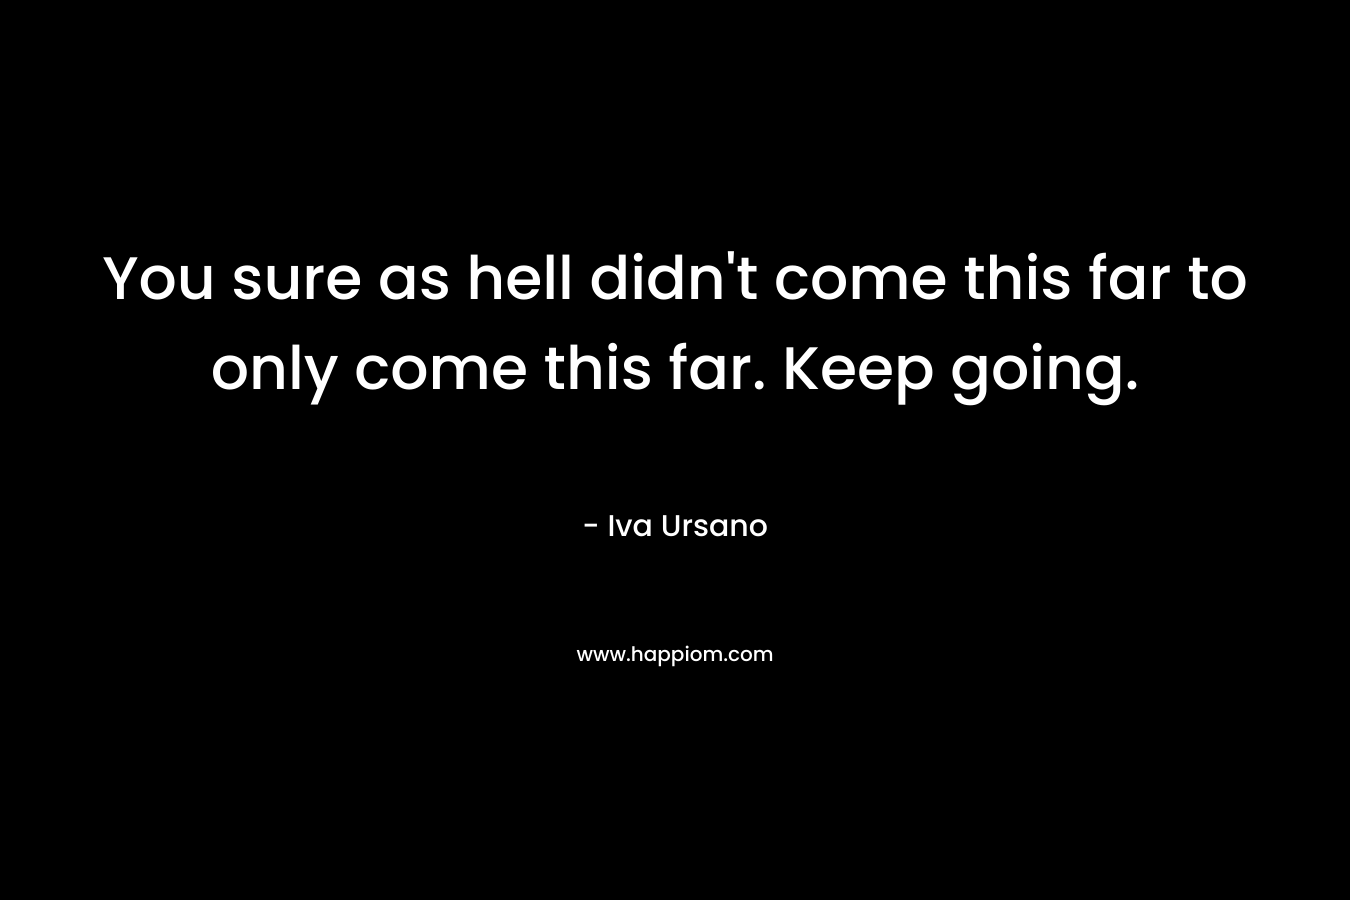 You sure as hell didn’t come this far to only come this far. Keep going. – Iva Ursano